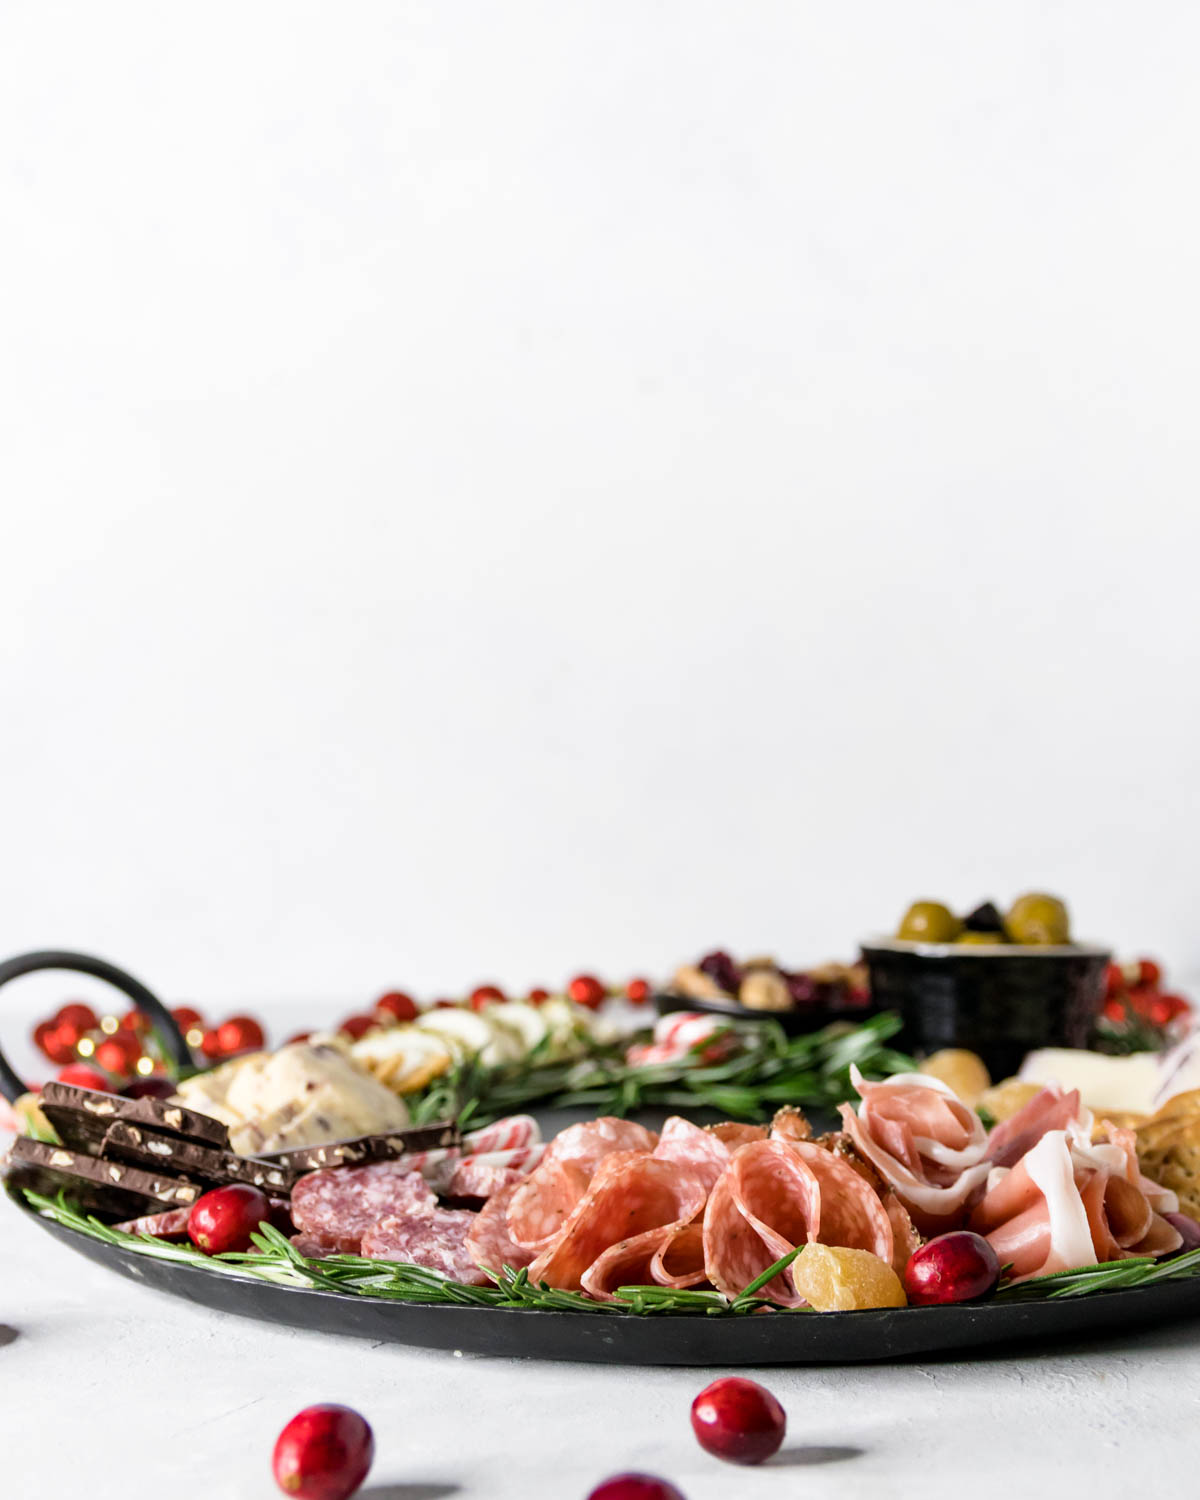 a christmas charcuterie board on a light table with a white background